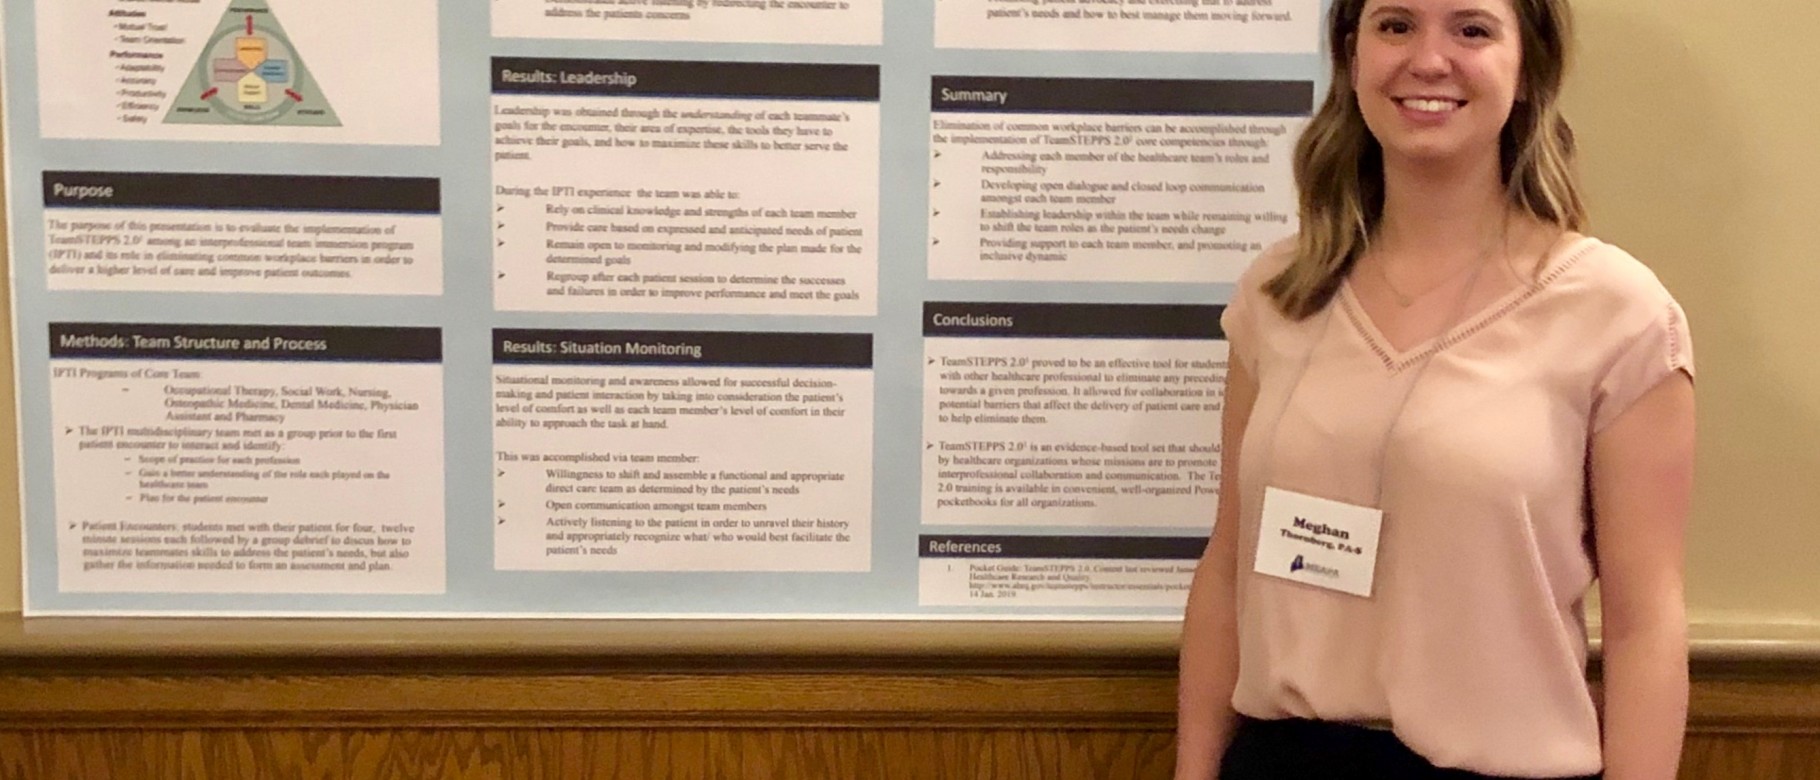 Physician Assistant student Meghan Thornberg was one of several UNE presenters at the MEAPA conference